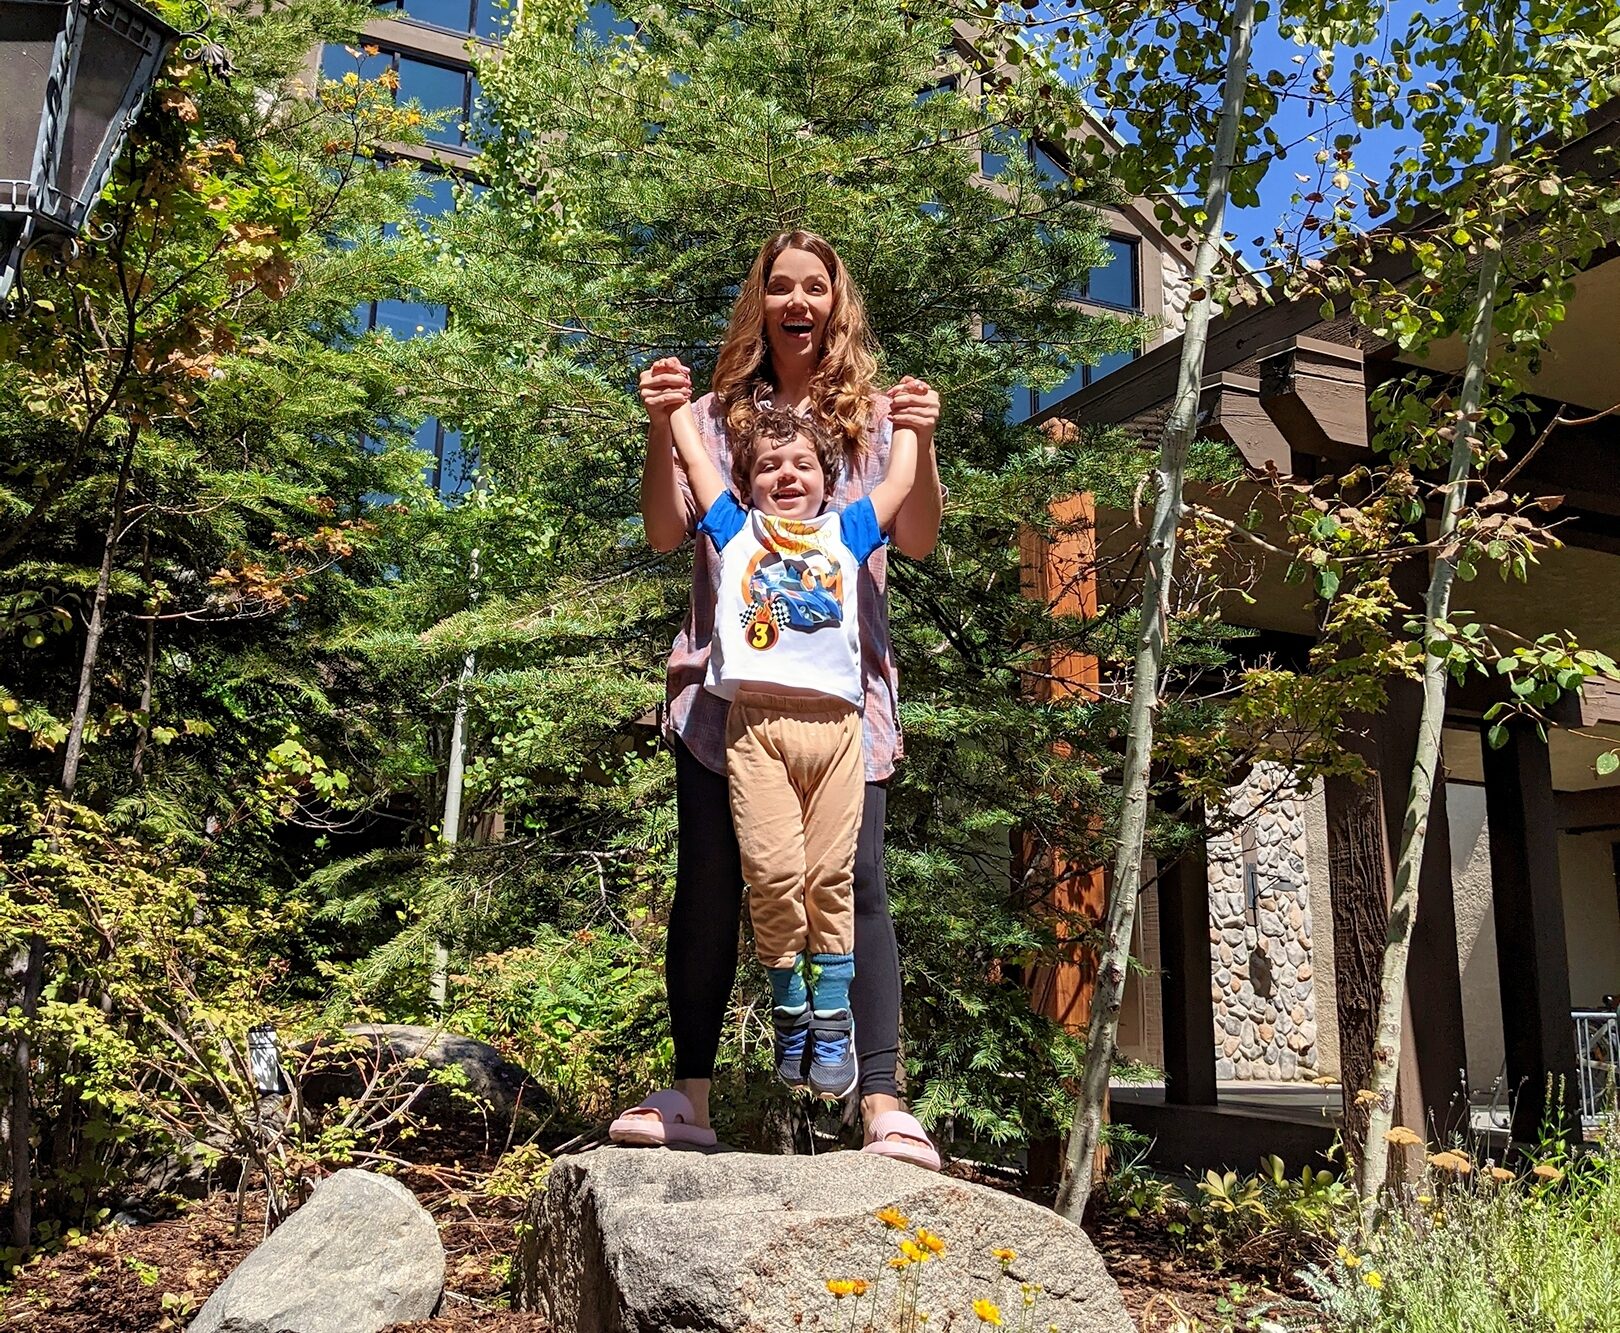 Yosemite Family Travel Guide – Where To Stay and What To Do